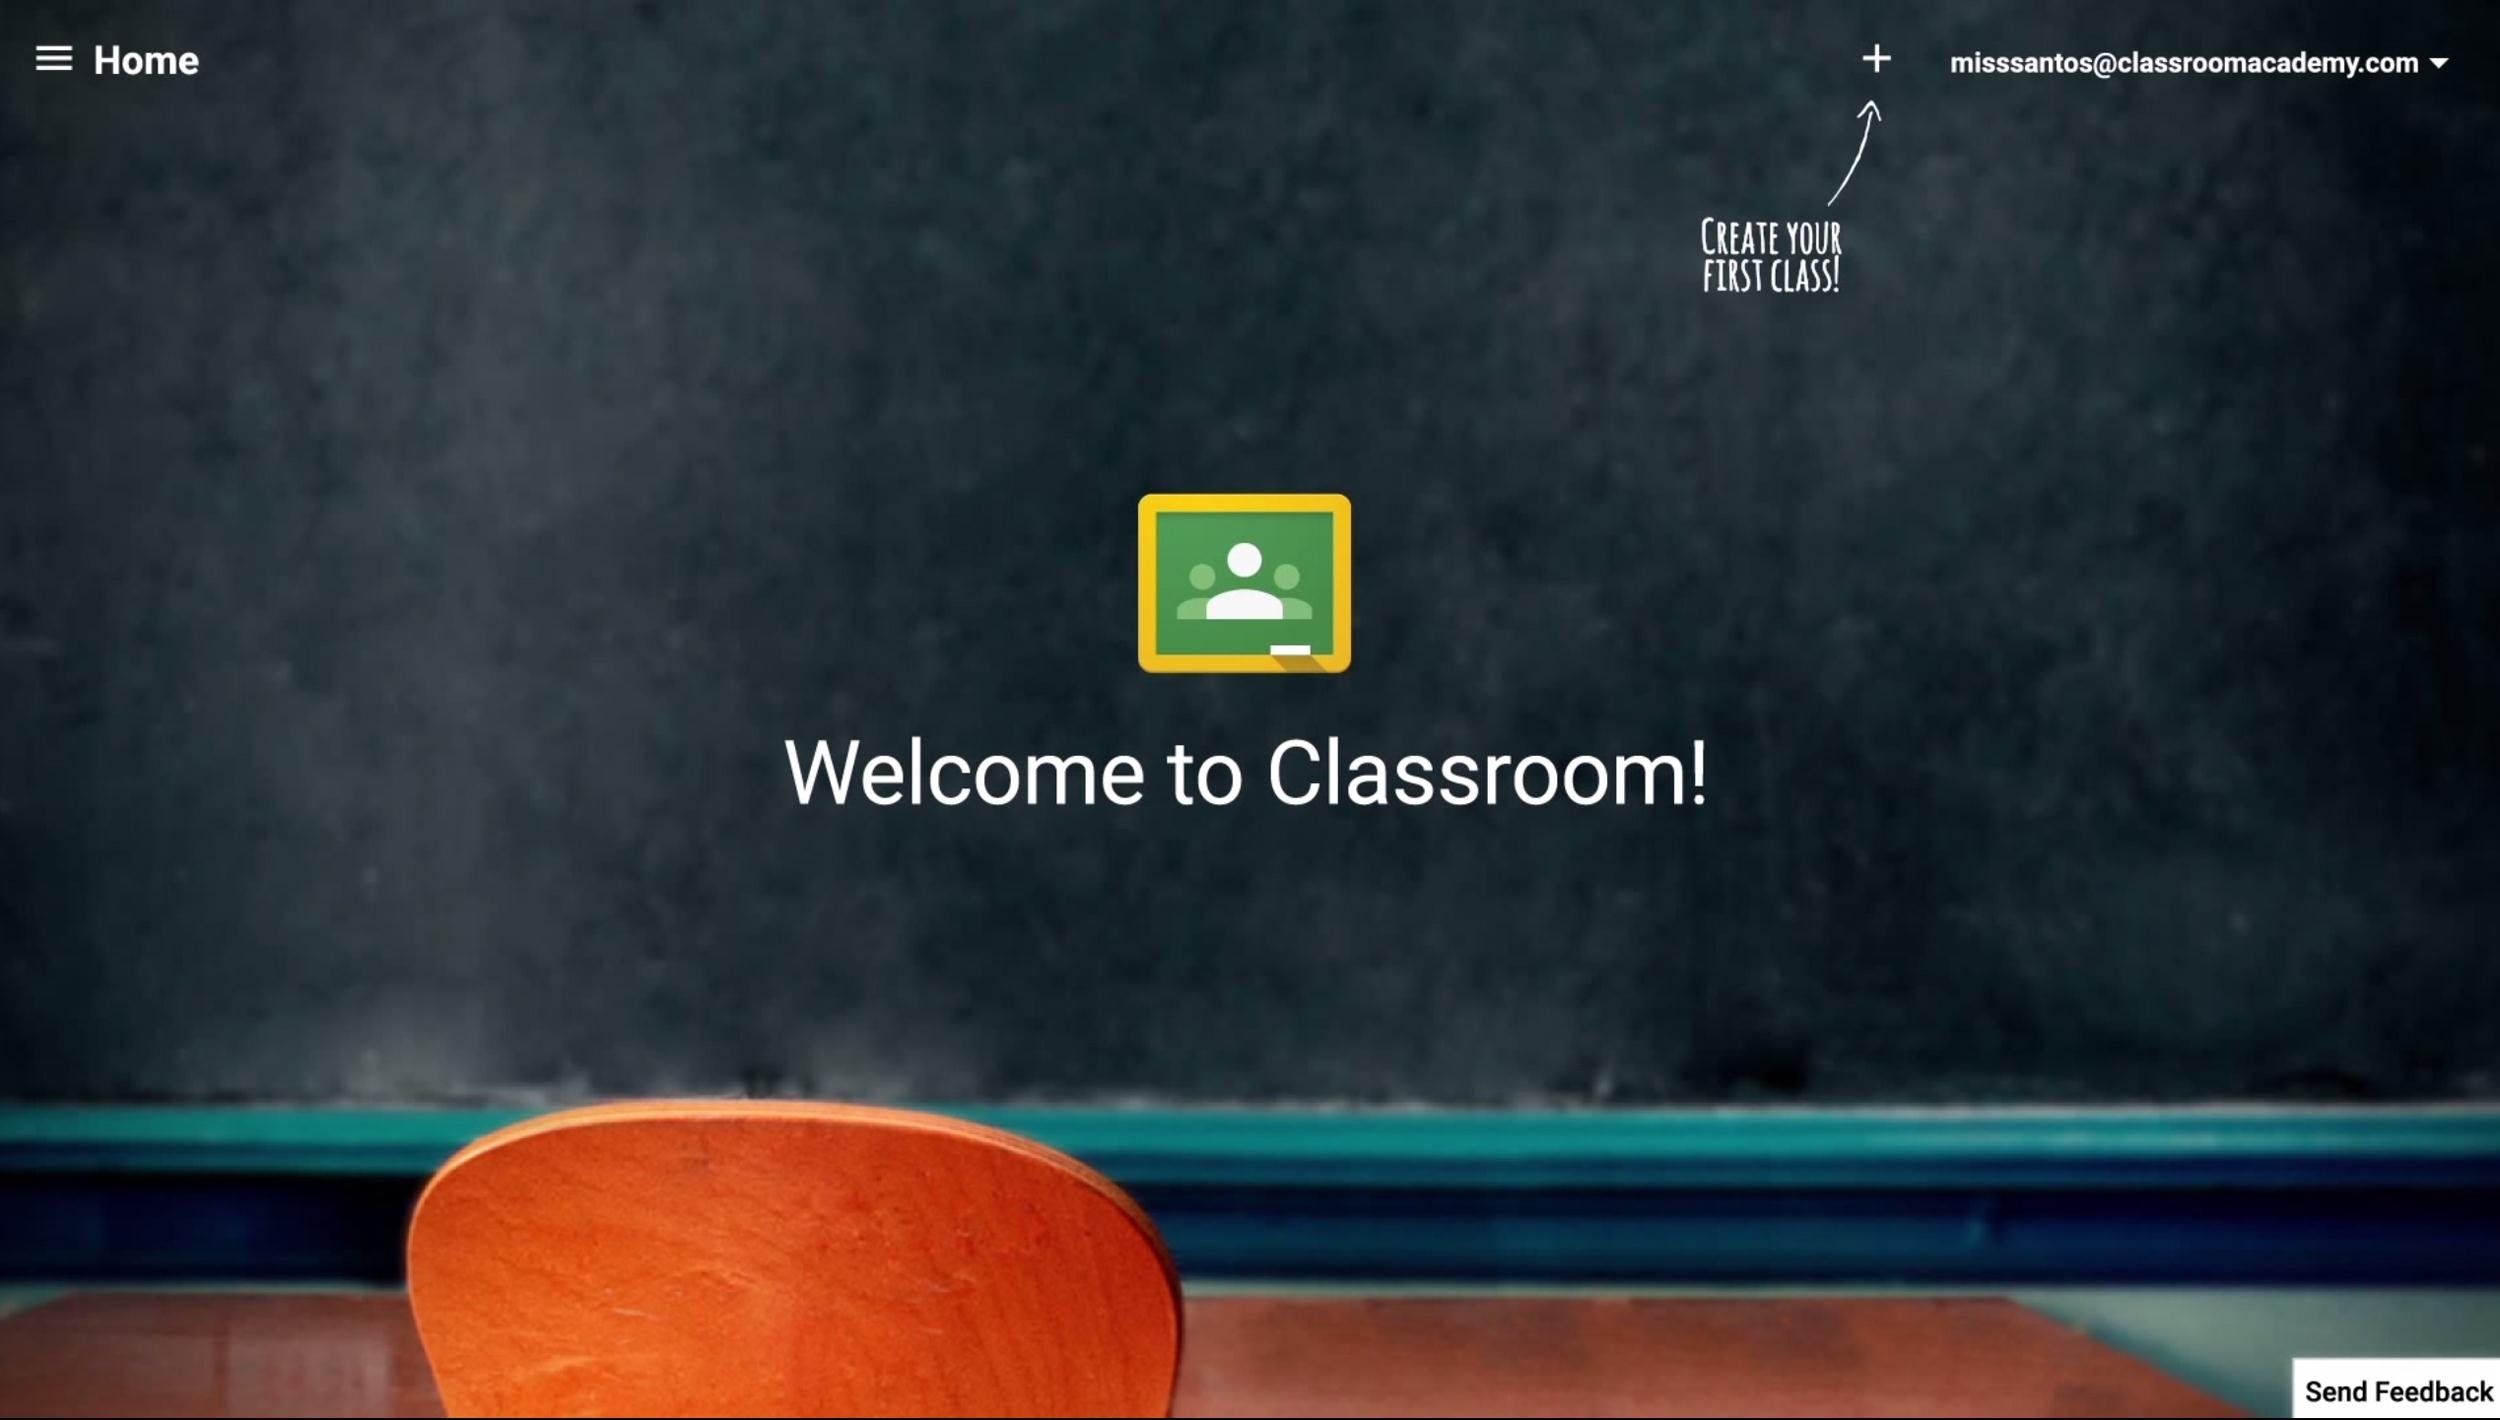 Personal Google accounts can now be used with Google Classroom